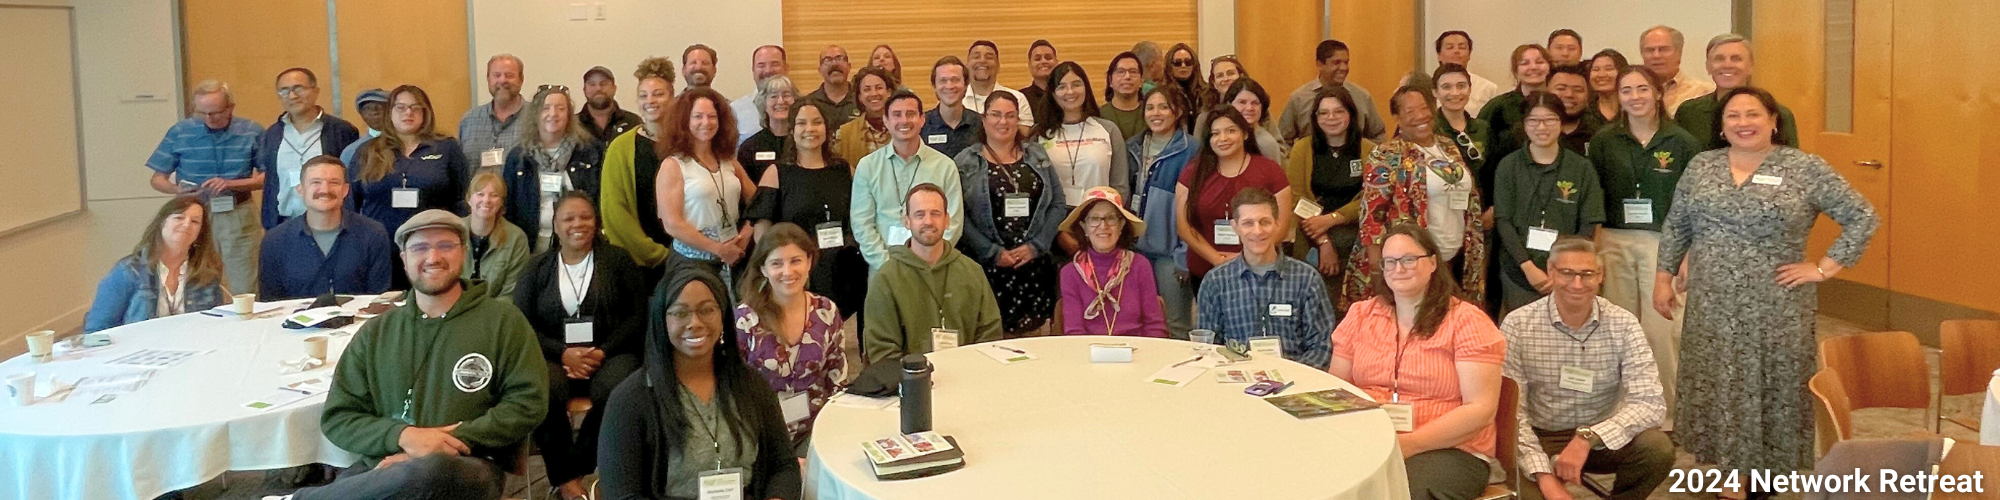 Group photo of participants at the California ReLeaf Network Retreat in Sacramento in 2023